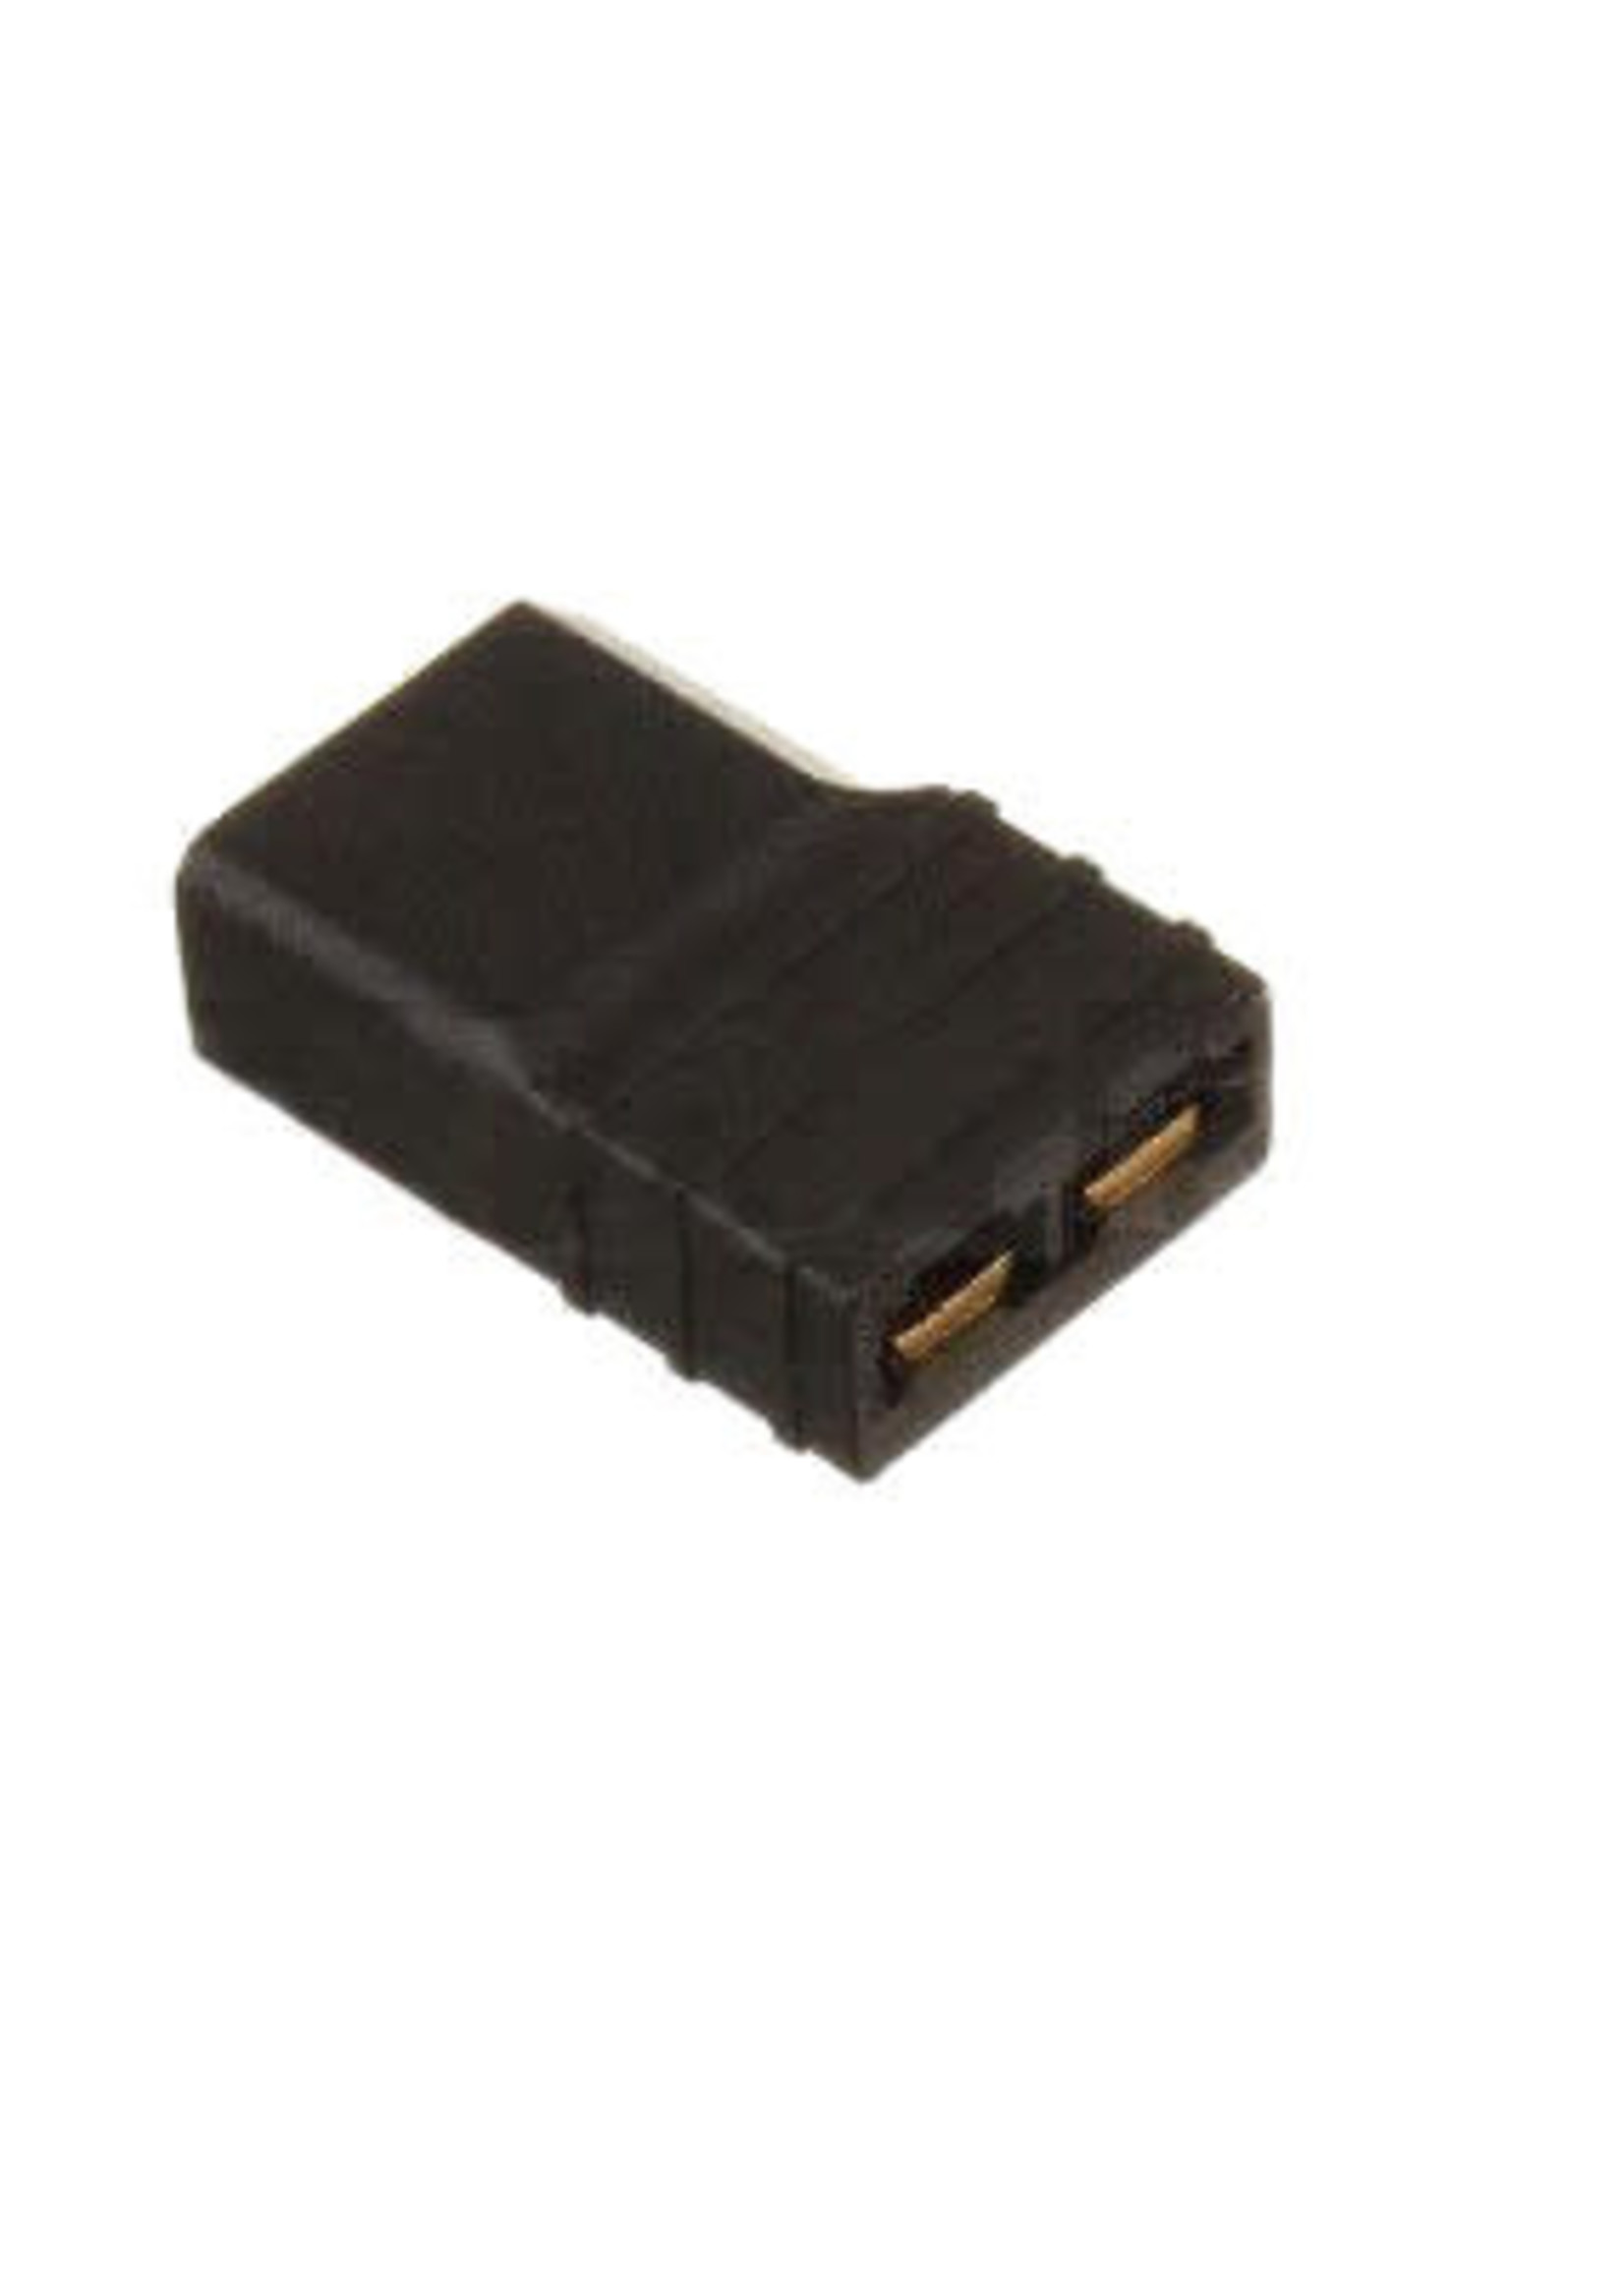 EPB Direcr Connect Adapter TRX Male to XT60 Female